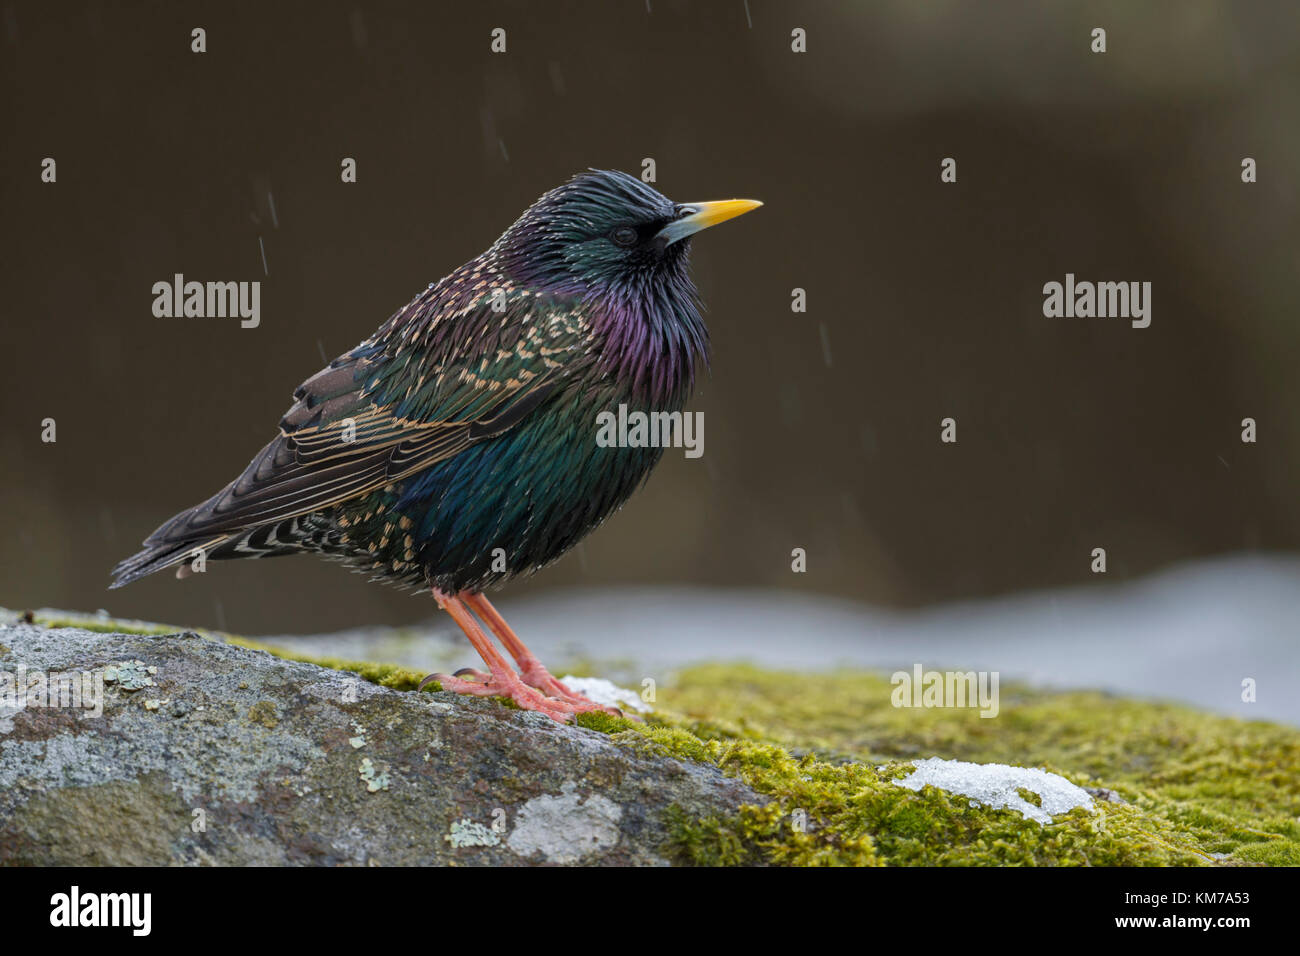 Common Starling ( Sturnus vulgaris ) adult in its breeding dress, perched on a rock in rain, nice metallic shimmering plumage, in Spring, Europe. Stock Photo